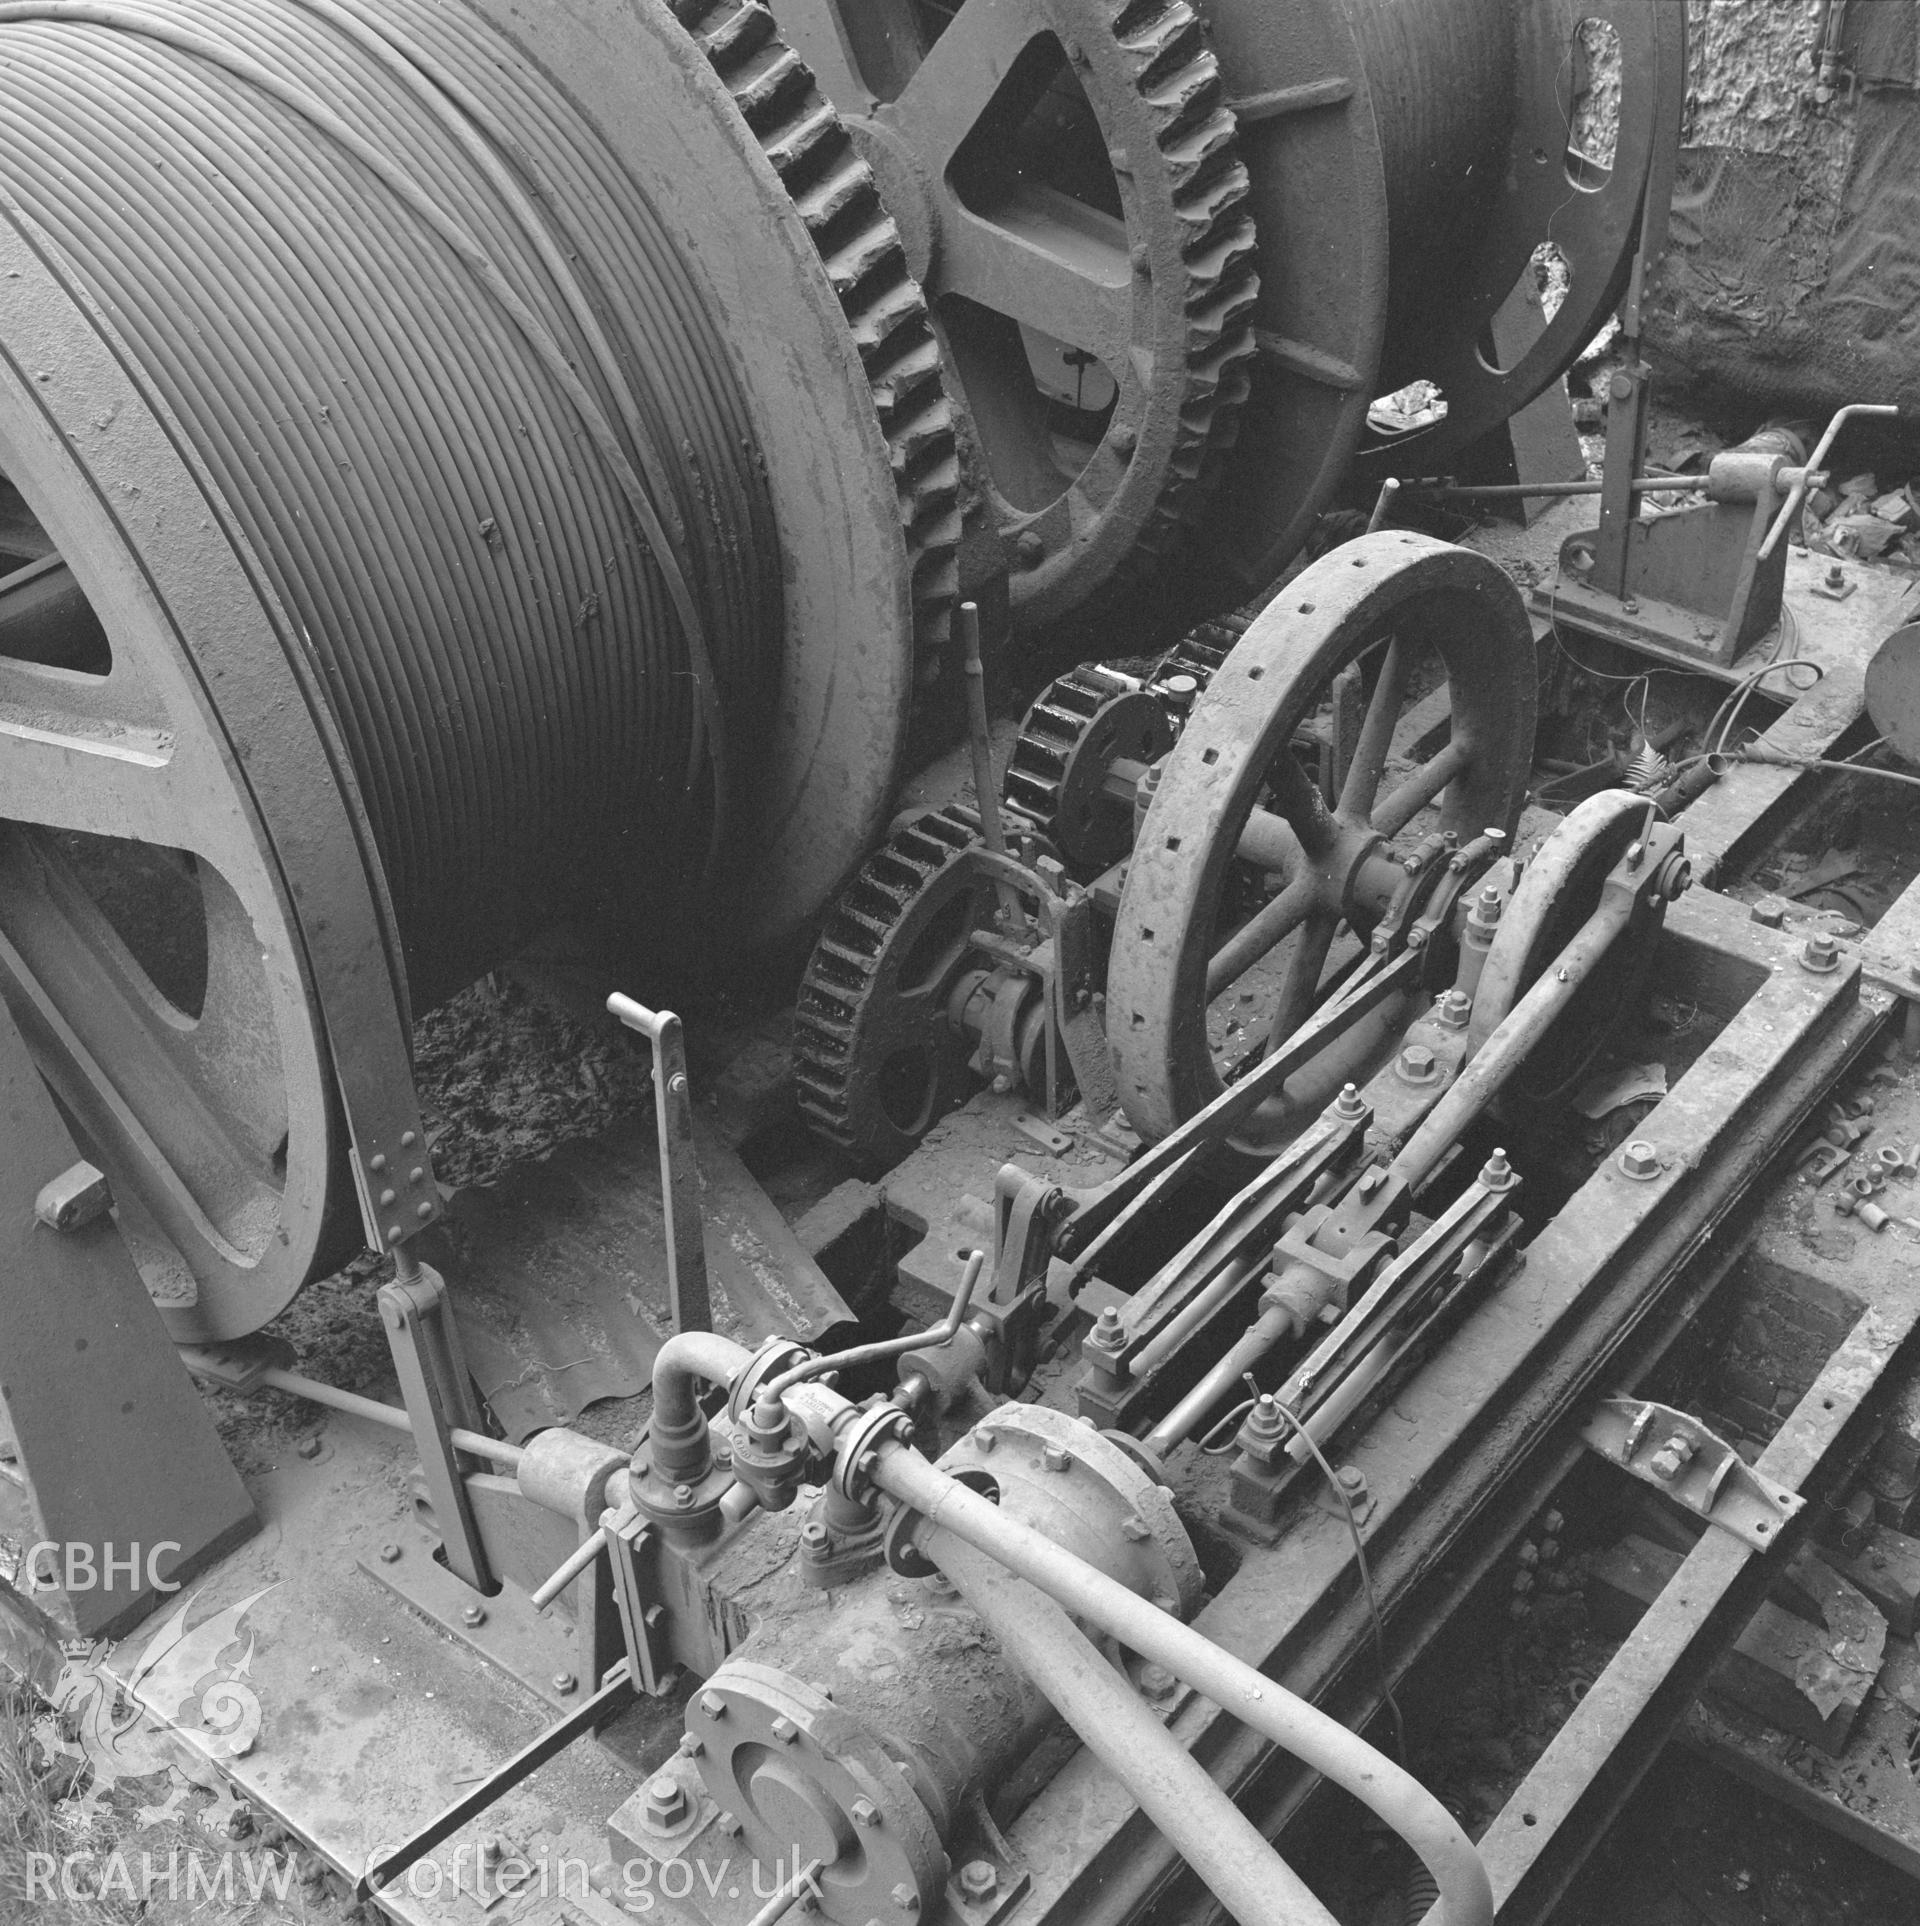 Digital copy of an acetate negative showing steam winder at Cefn Coed Colliery, from the John Cornwell Collection.